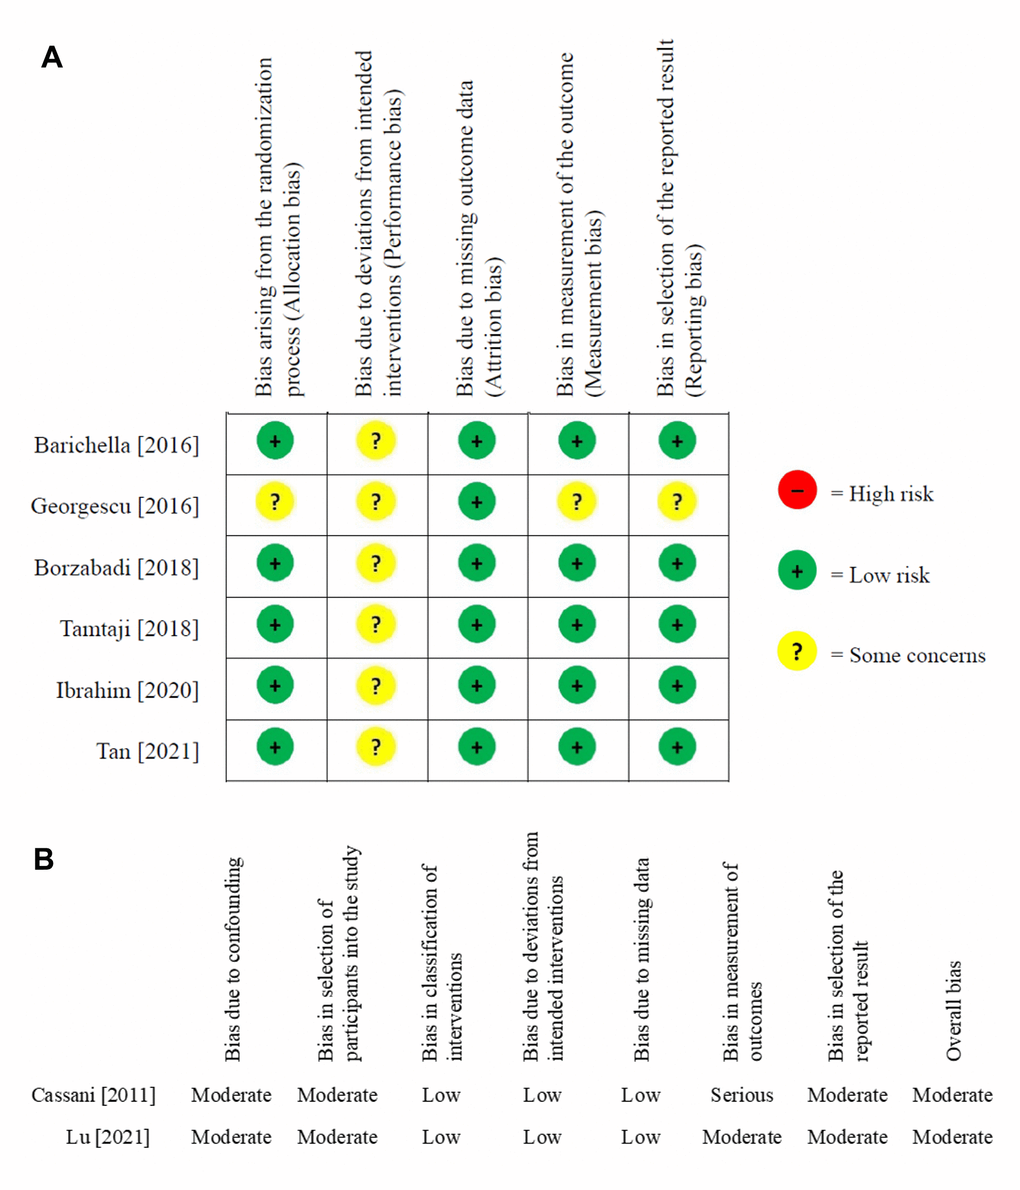 Risk of bias assessment (A) randomized controlled trials (B) nonrandomized controlled trials. green light with cross: low risk; yellow light with question mark: some concerns.